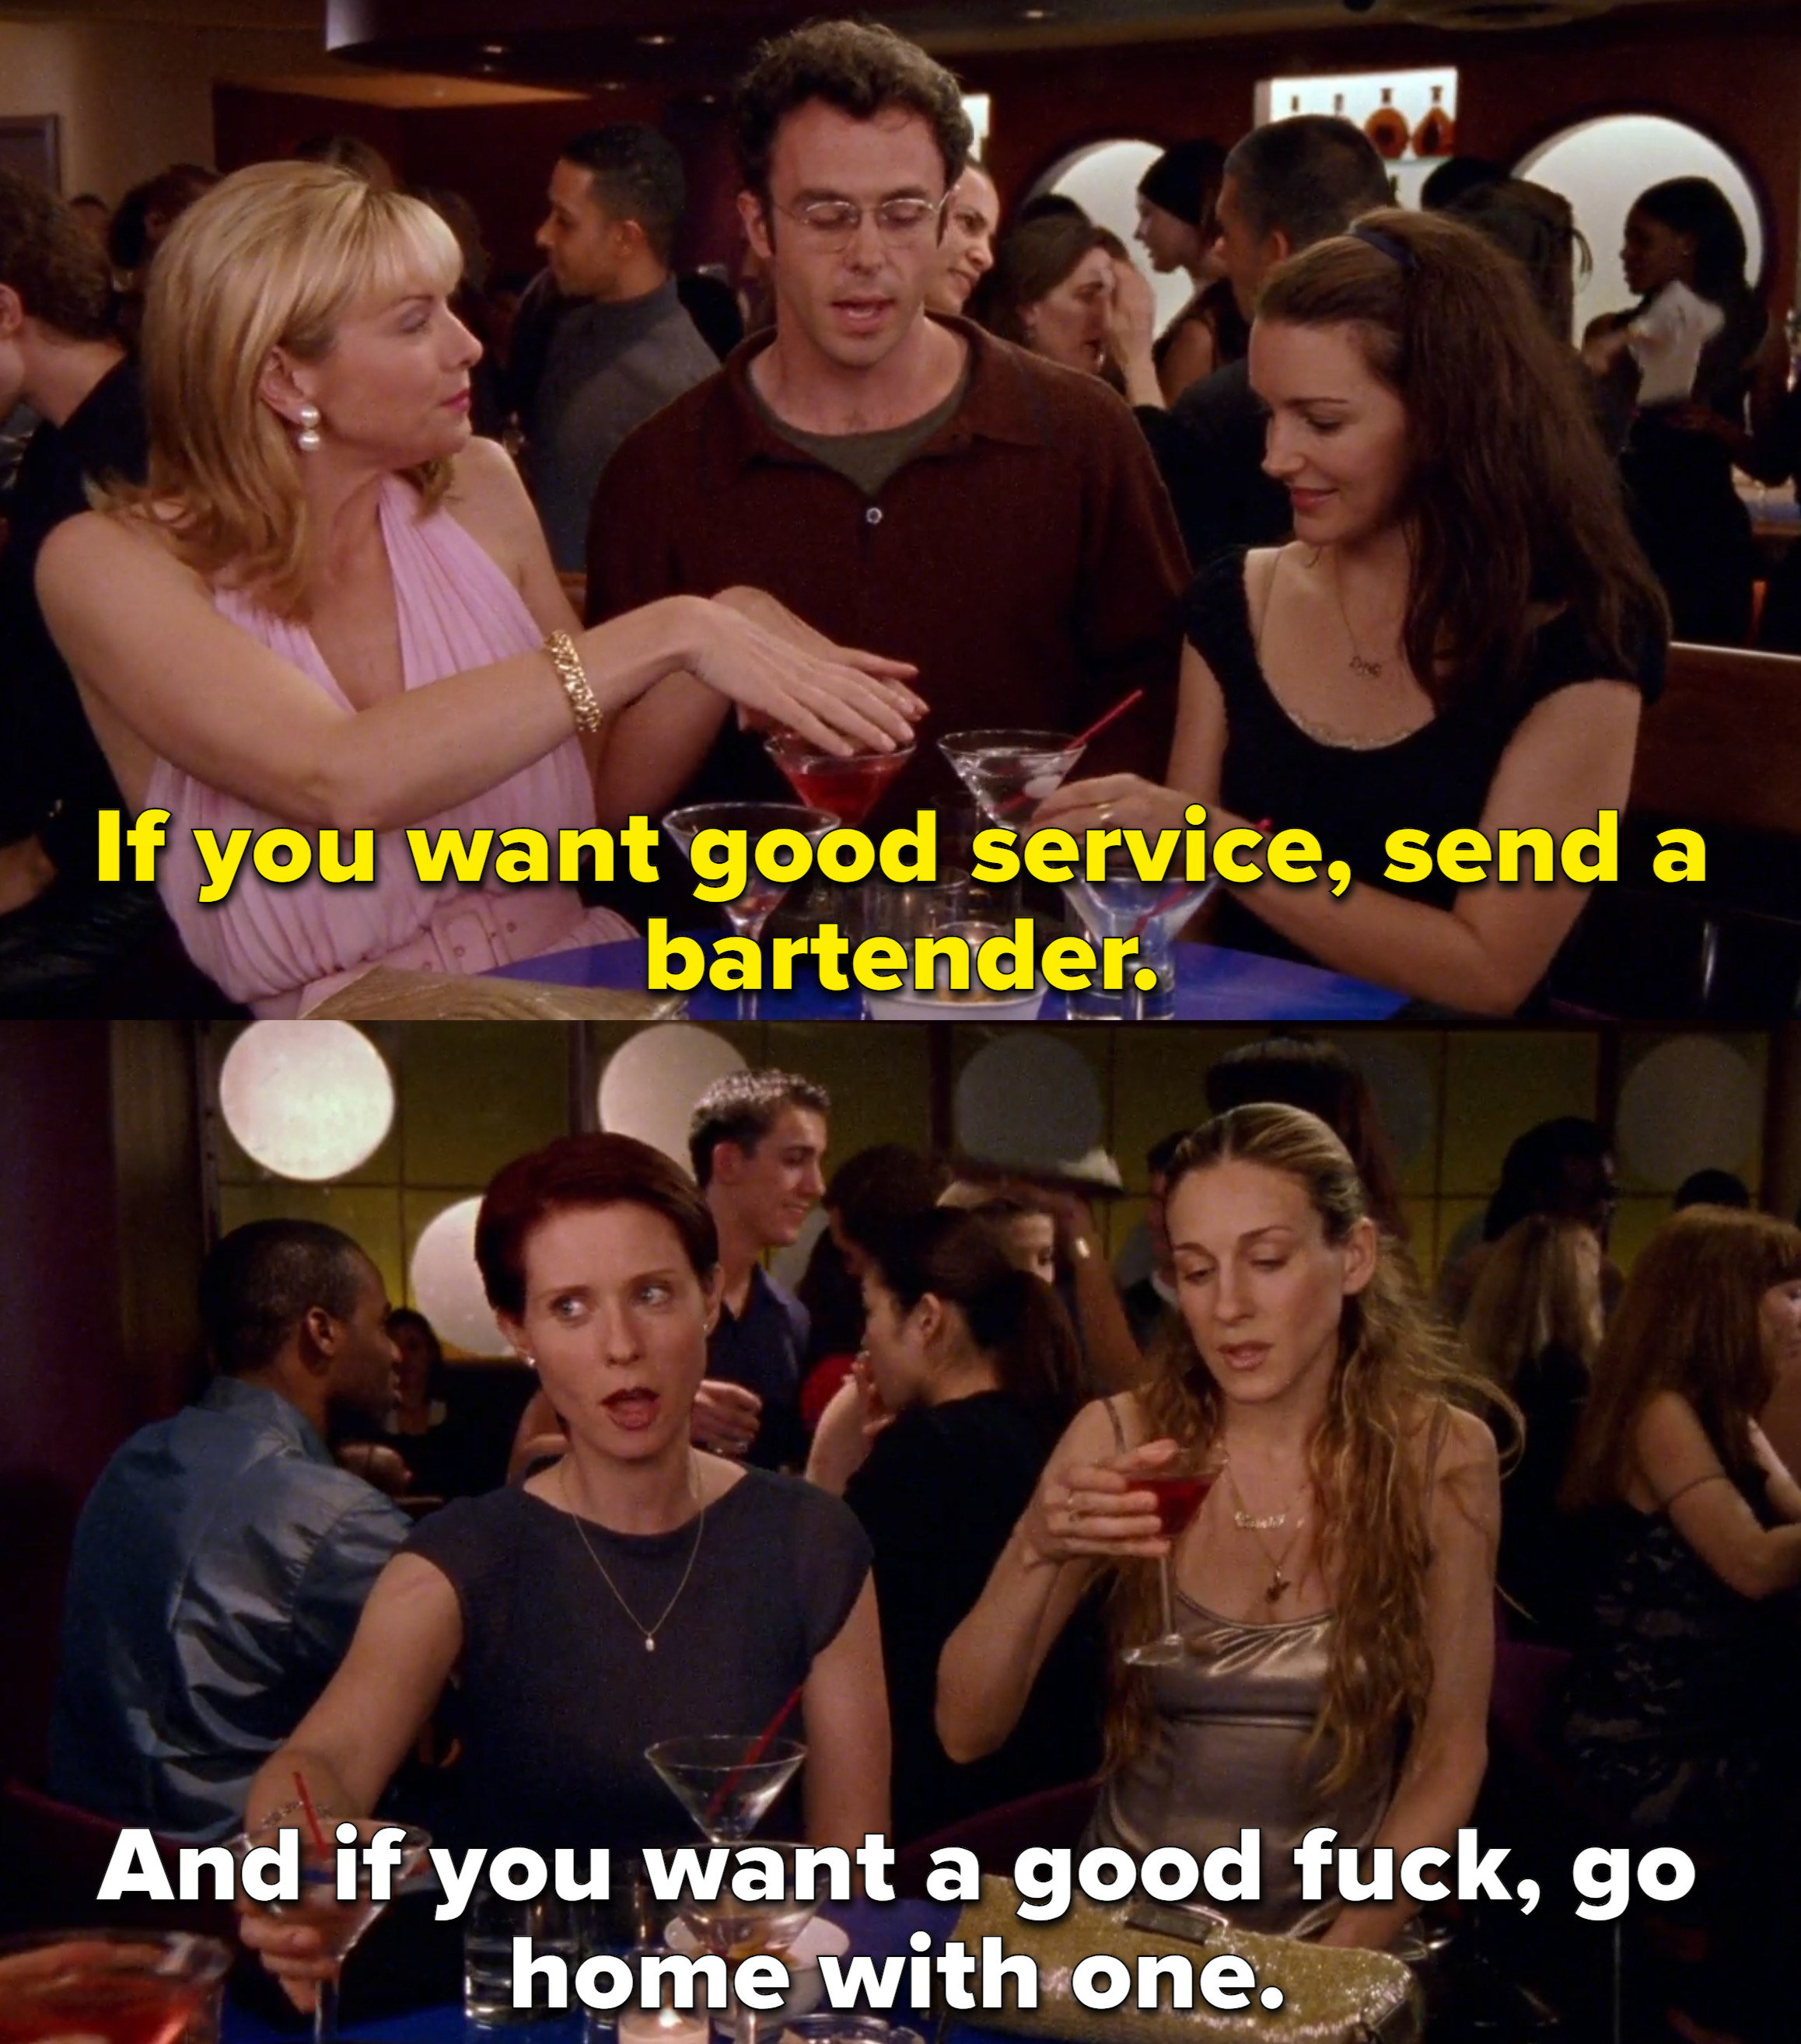 Scene from Sex and the City of Steve saying &quot;If you want good service, send a bartender.&quot; and Miranda saying &quot;And if you want a good fuck, go home with one.&quot;